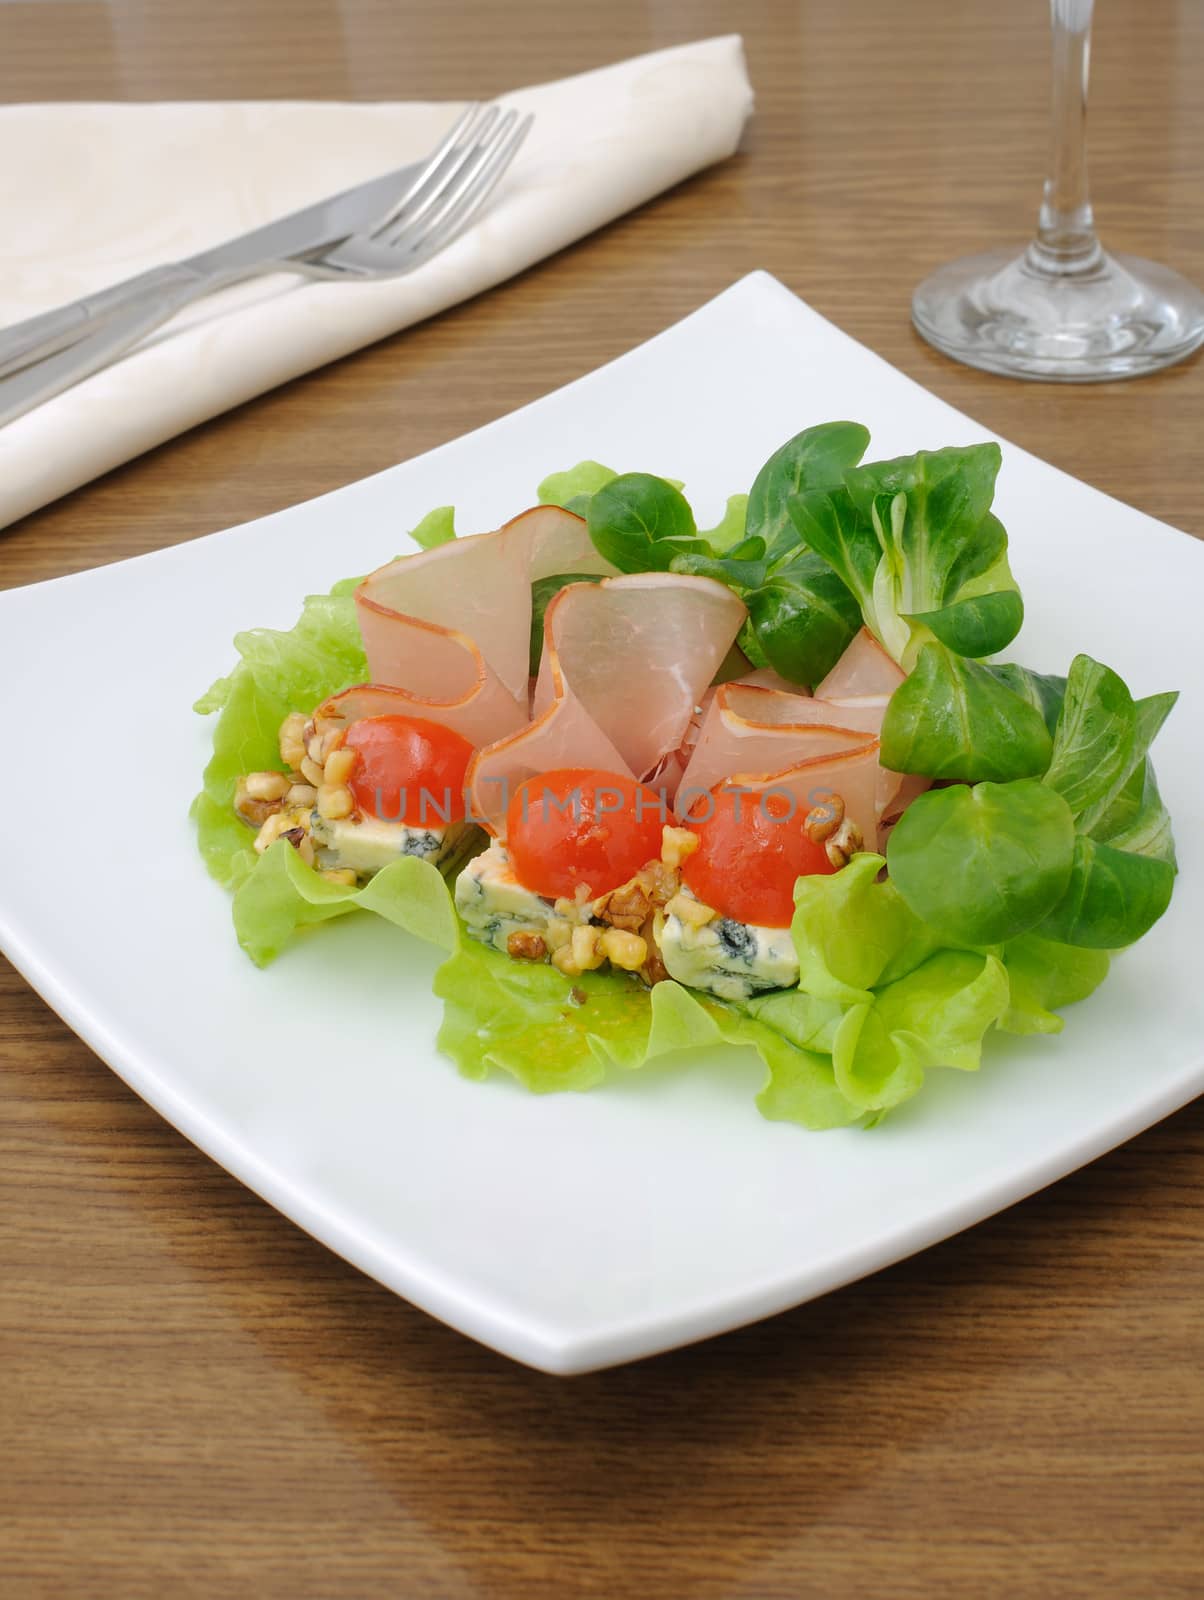 Jamon with blue cheese under the walnut sauce and cherry tomatoes in salad leaves